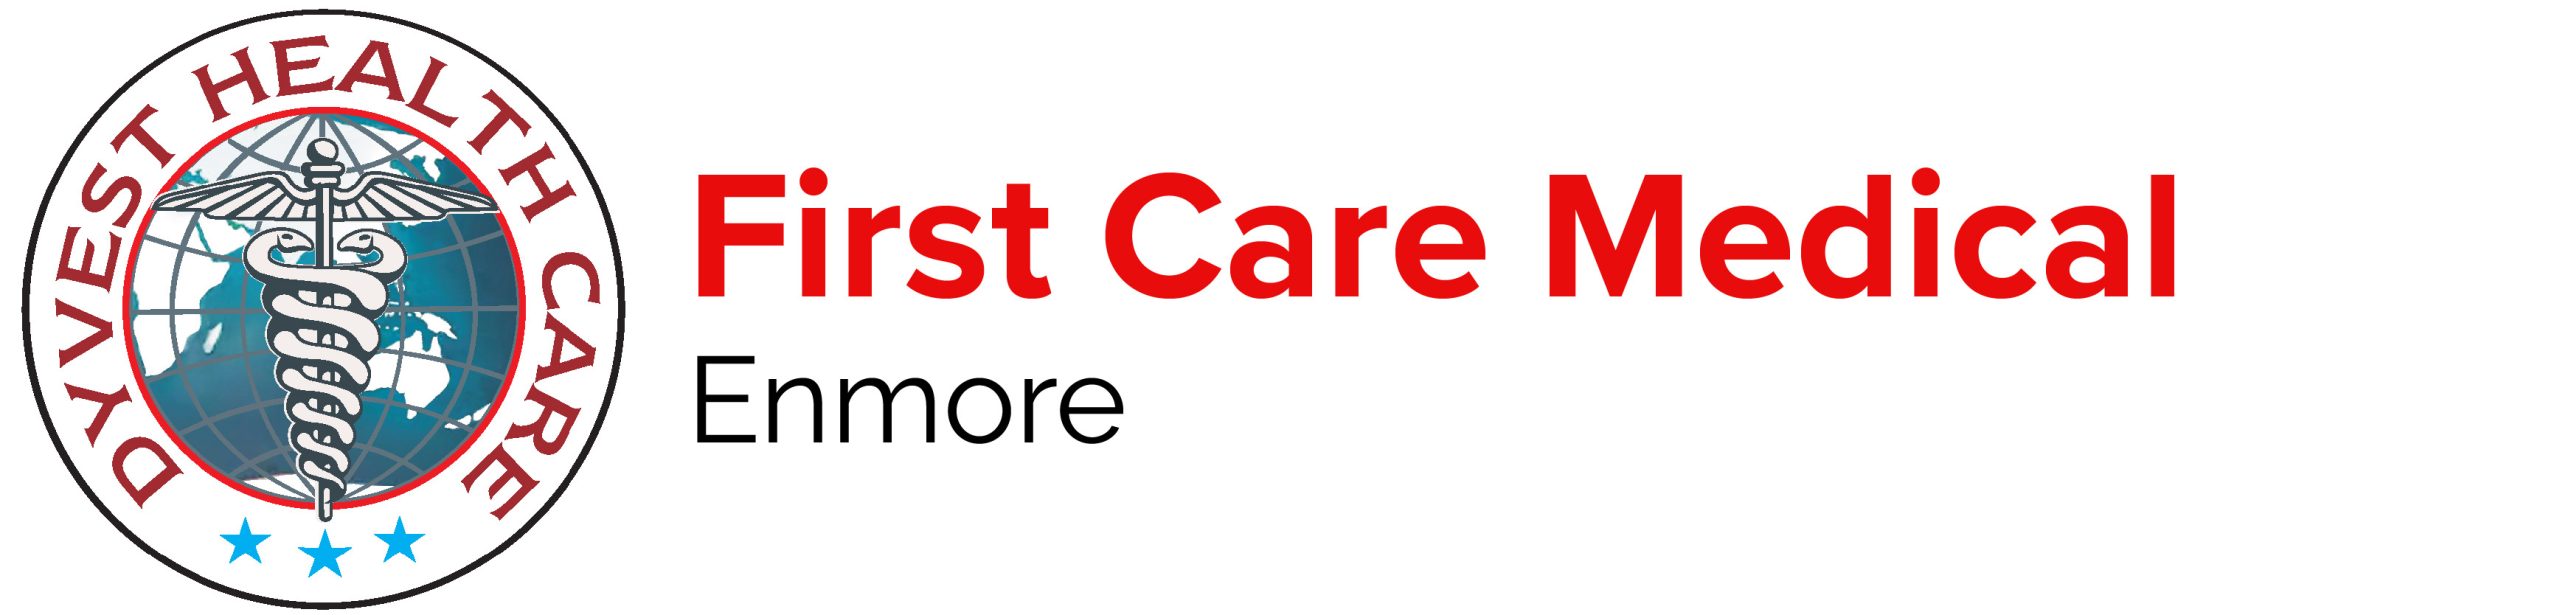 First Care Medical Enmore Logo